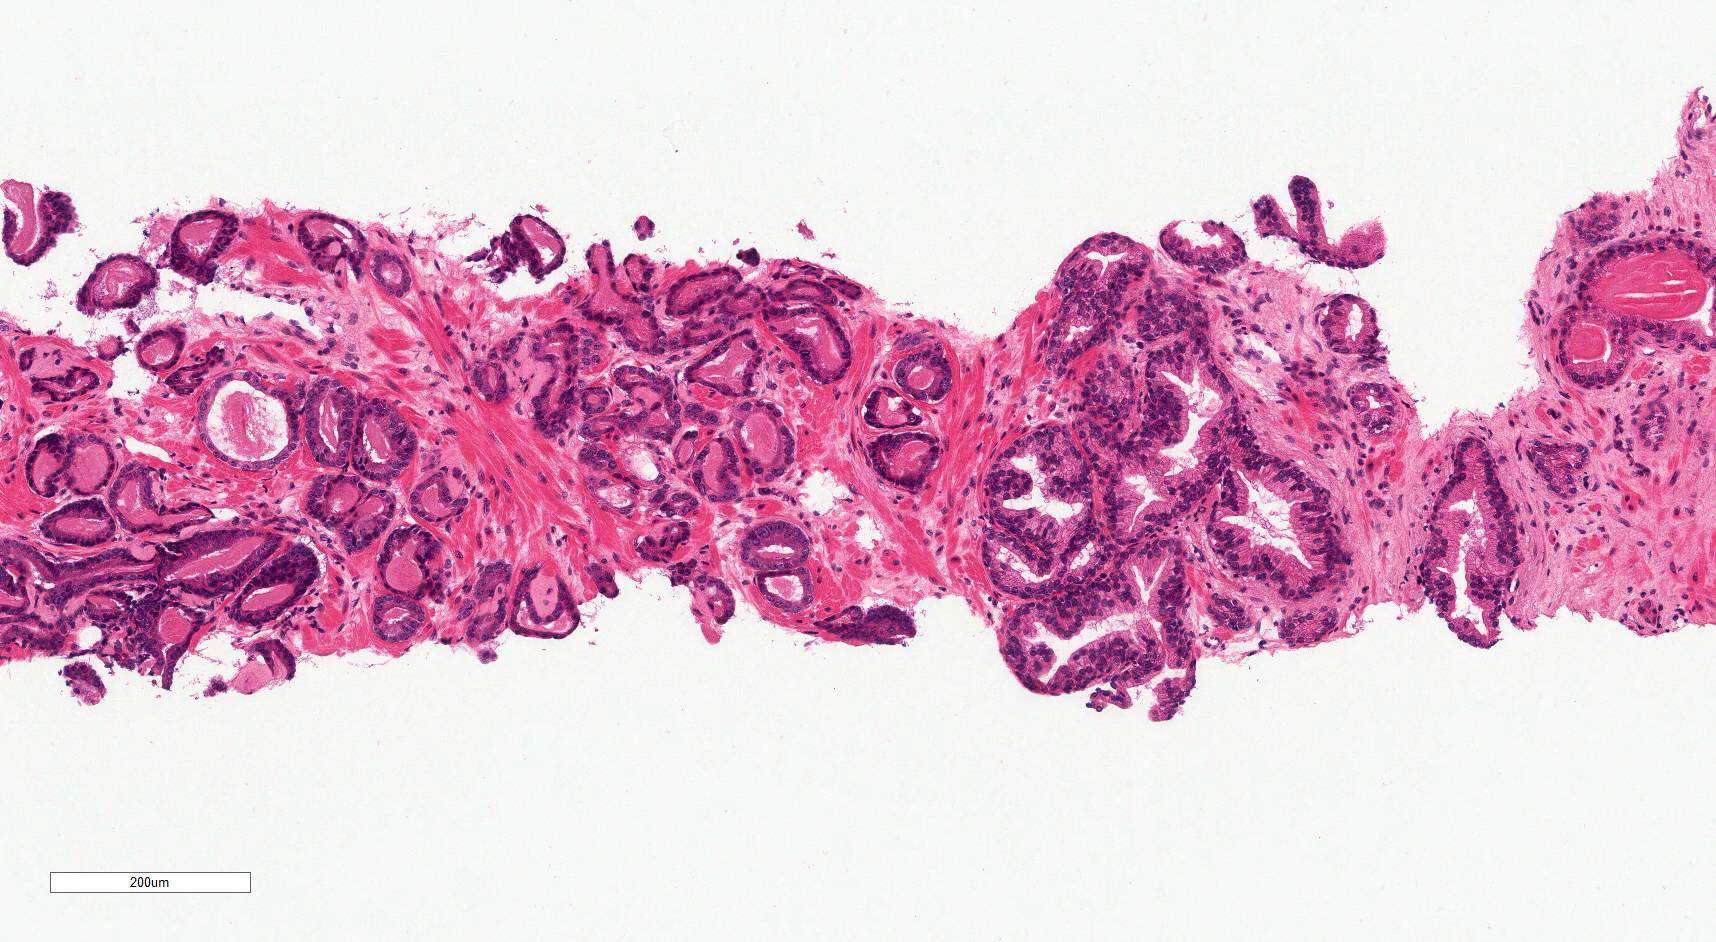 Pink amorphous material within gland lumens